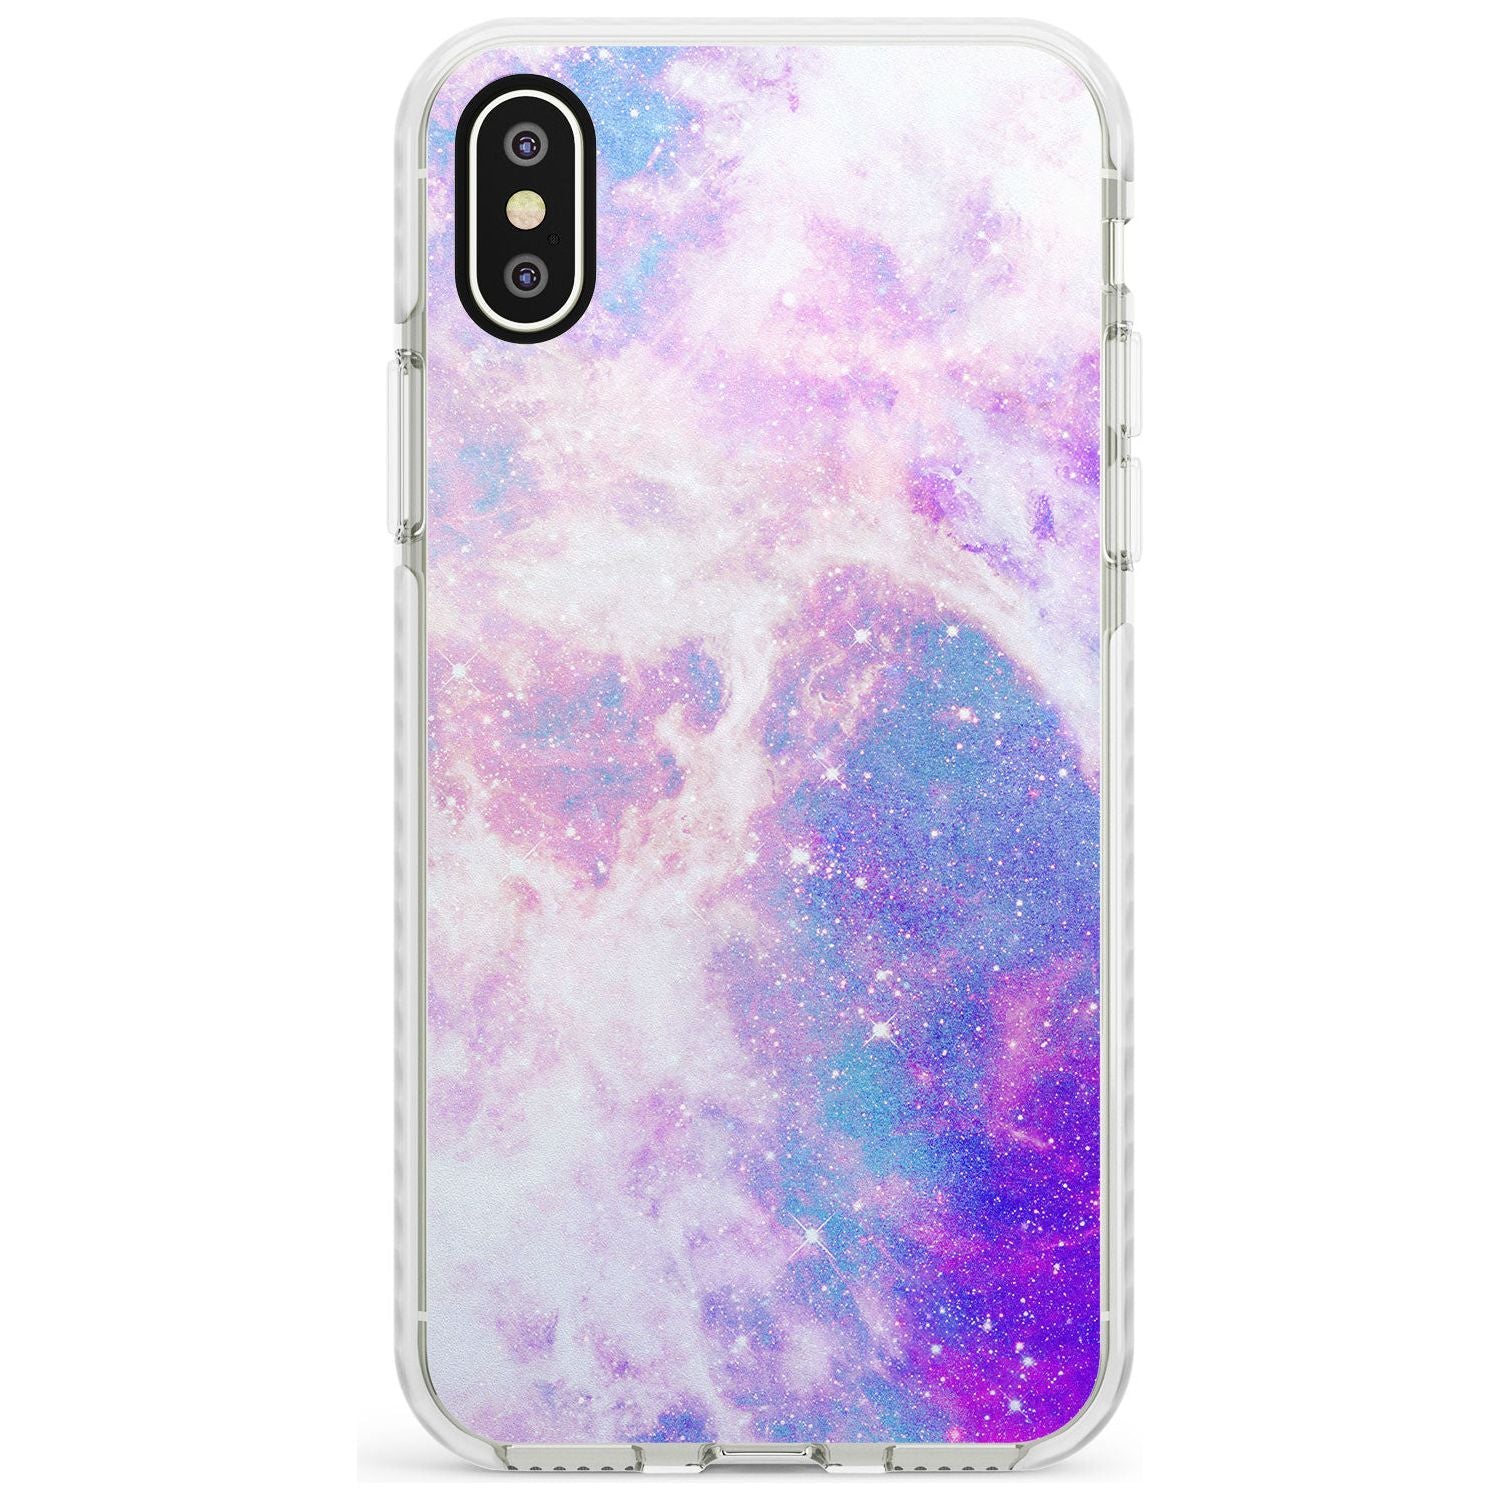 Purple & Blue Galaxy Pattern Design Impact Phone Case for iPhone X XS Max XR